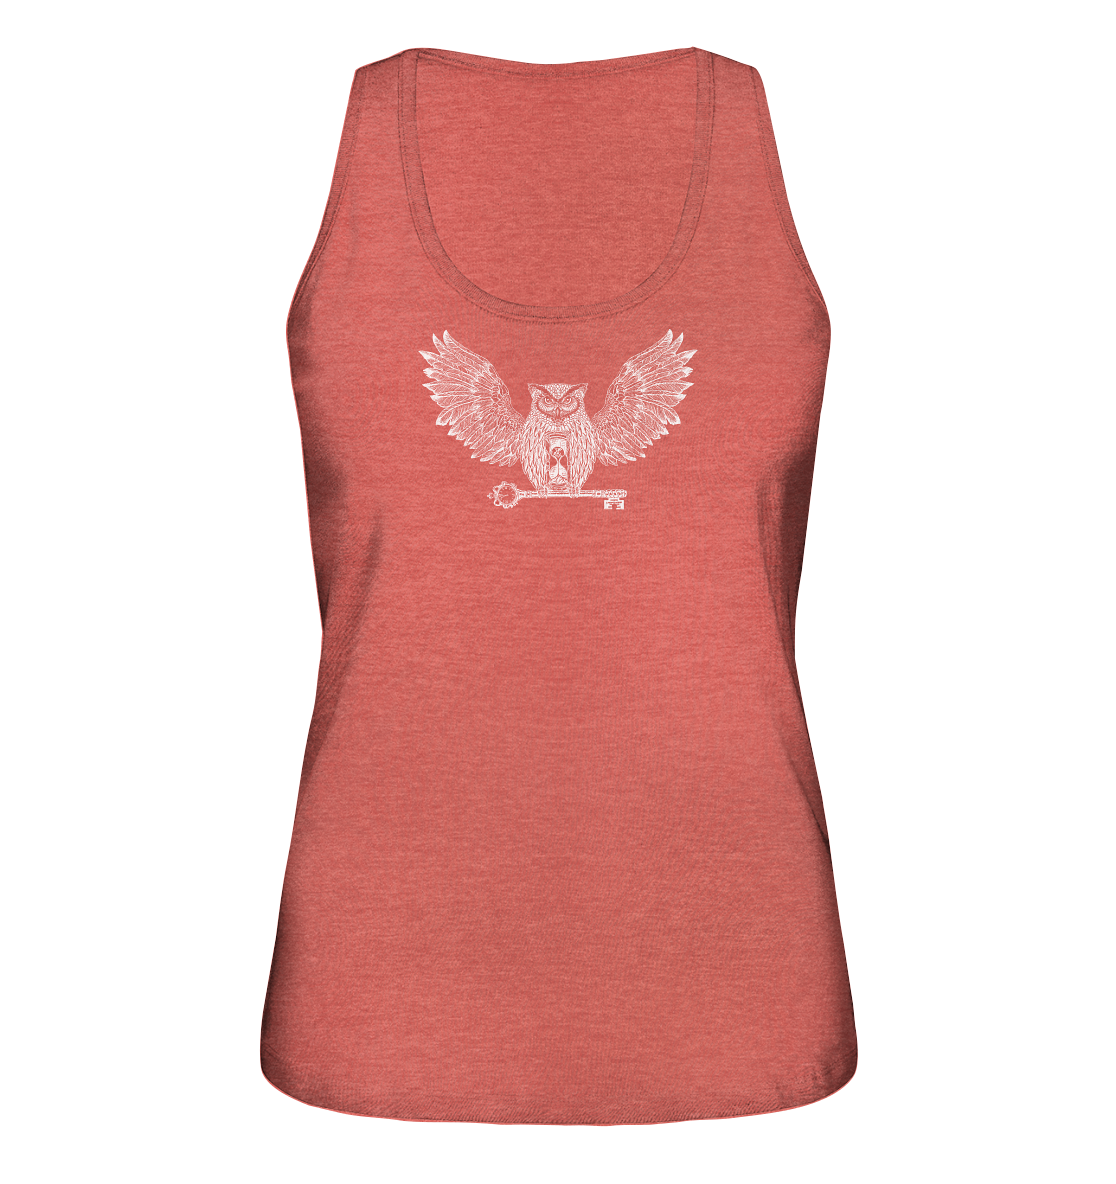 front-ladies-organic-tank-top-e05651-1116x-5.png